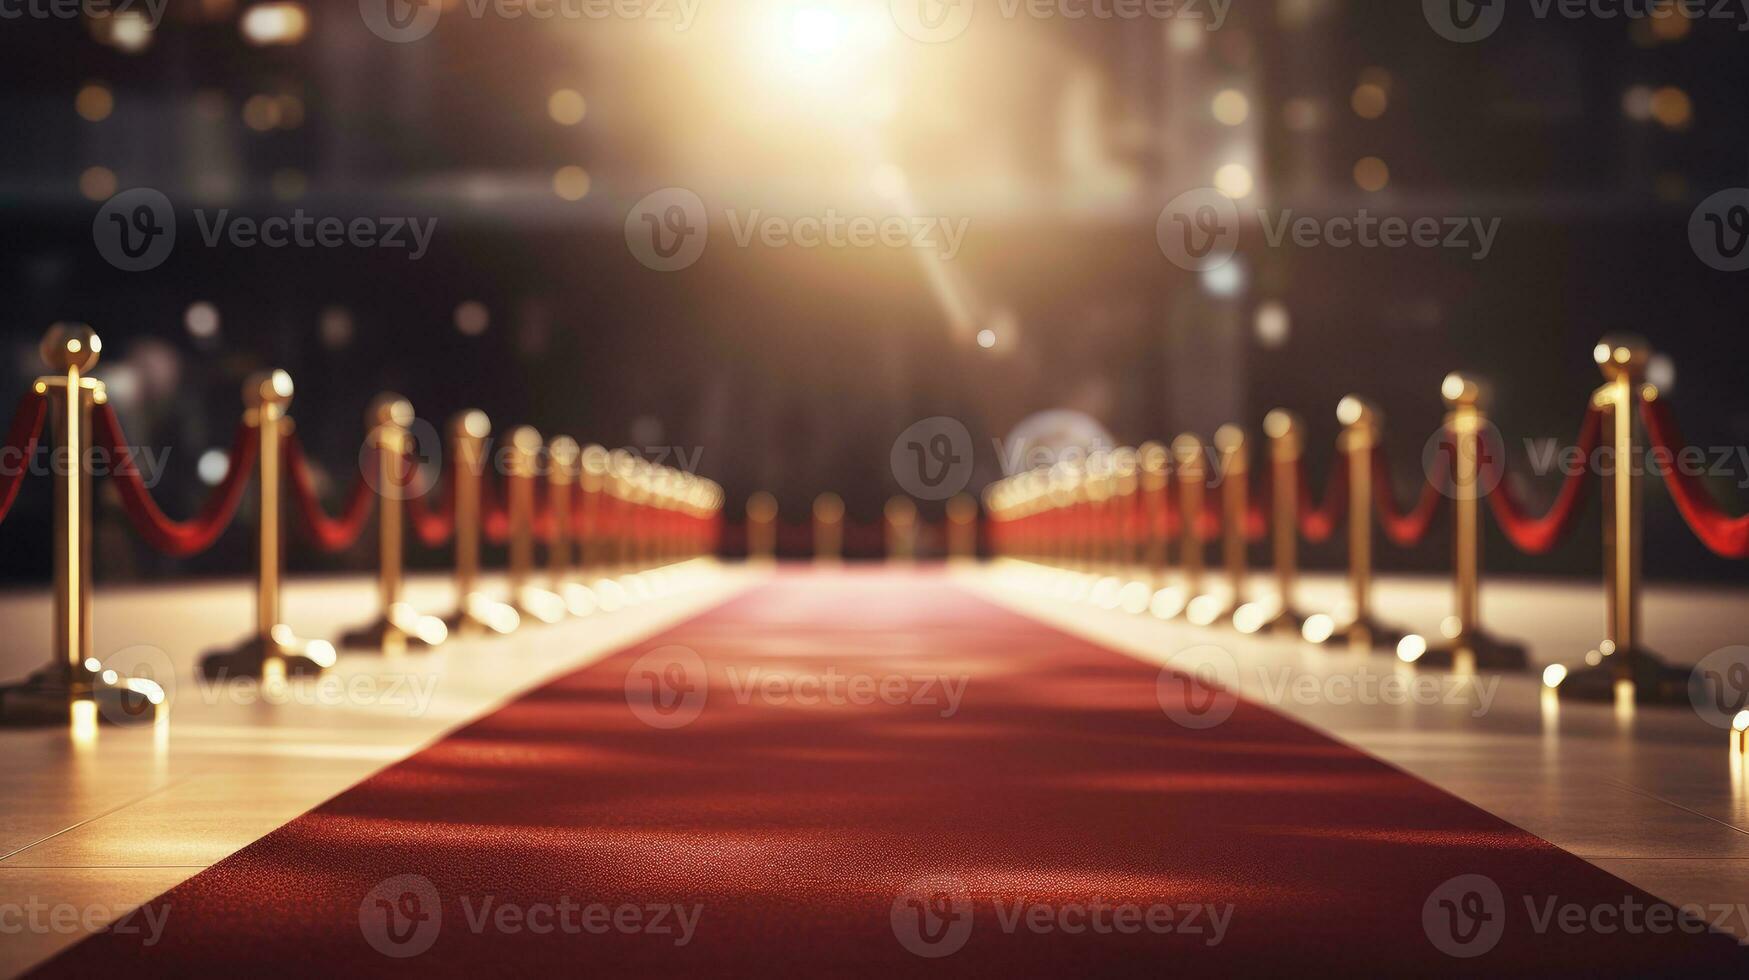 Red carpet and barriers with velvet rope, red curtains in the background and spotlight photo